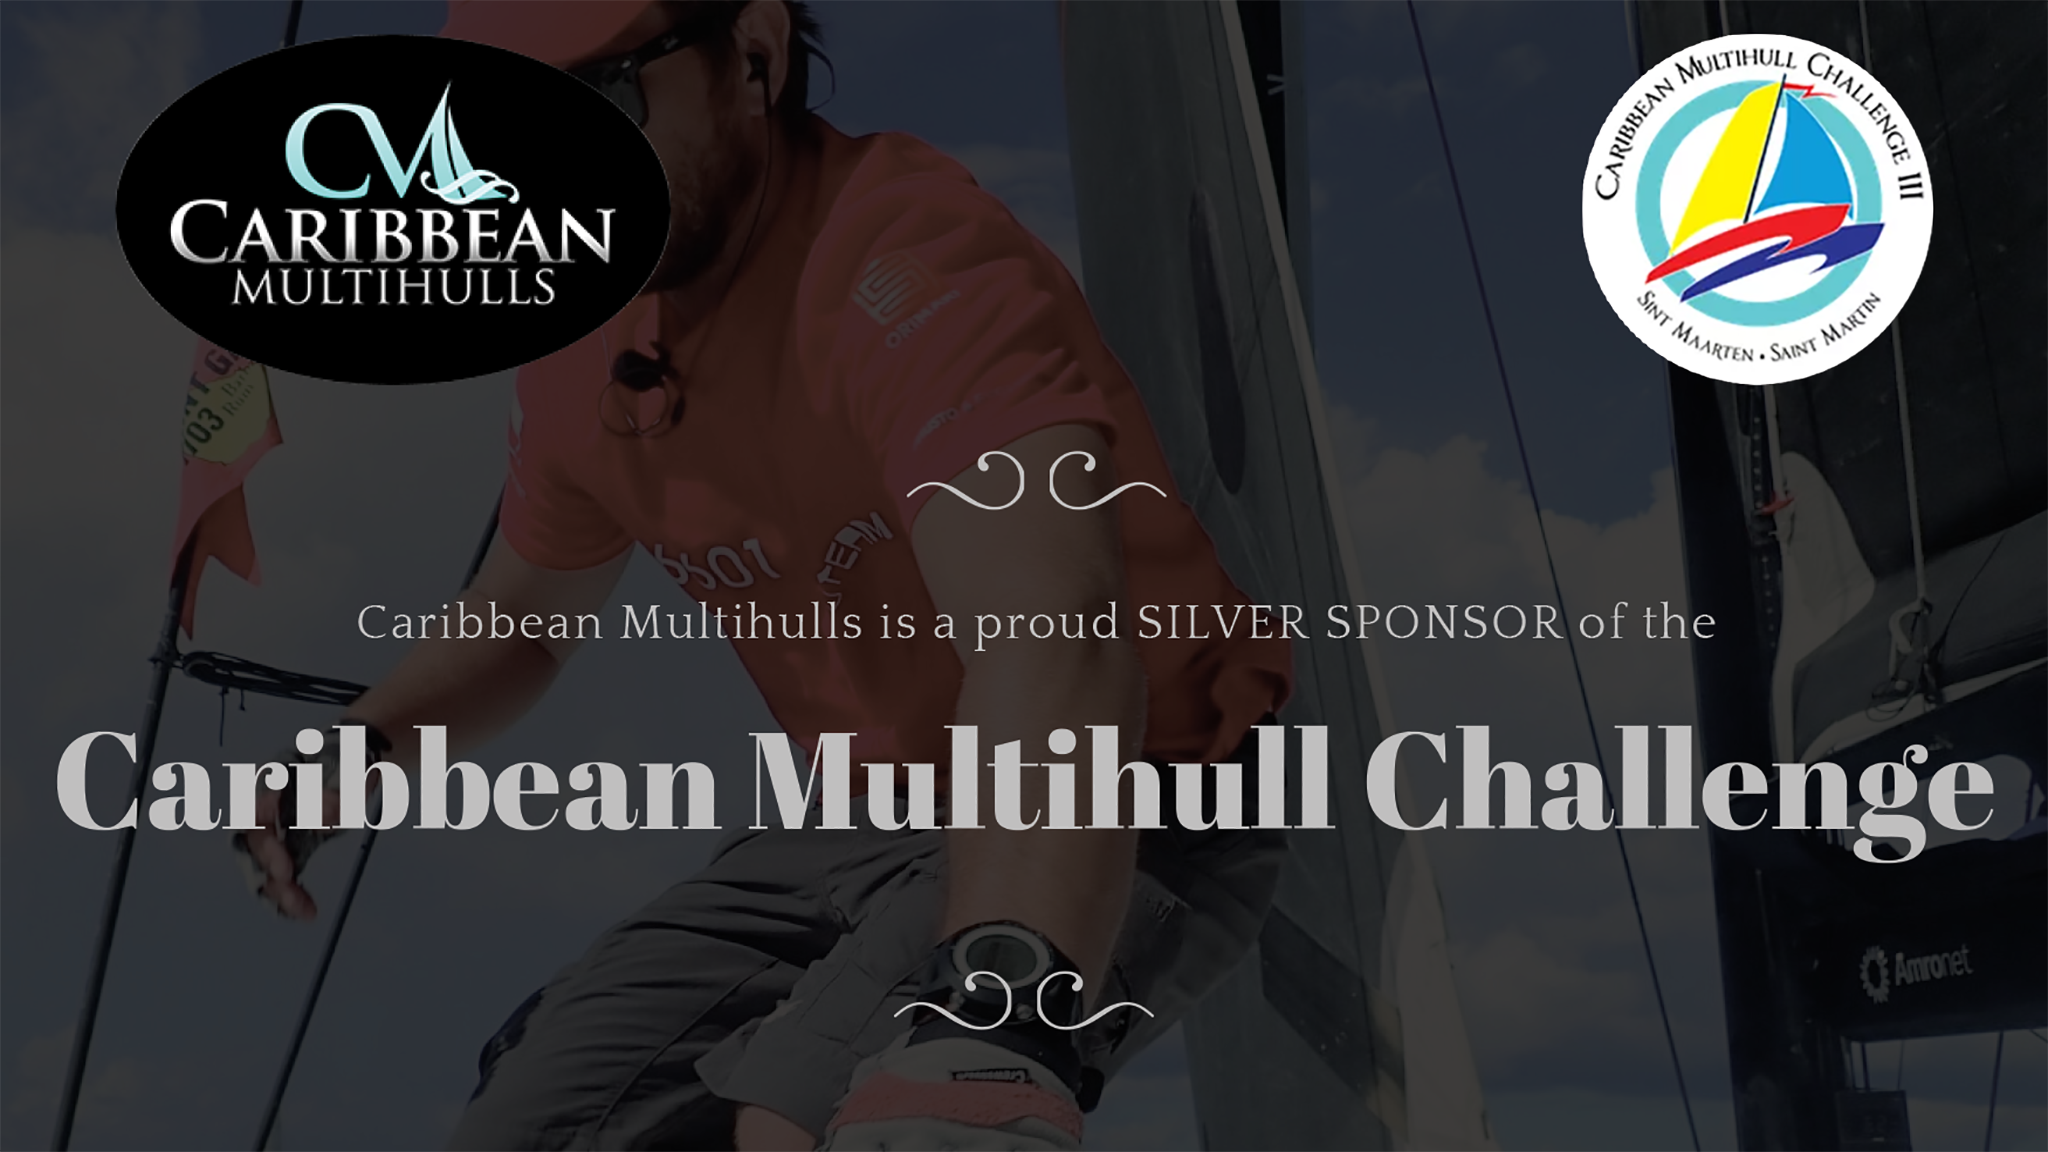 Caribbean Multihulls is proud to sponsor the 2021 Caribbean Multihull Challenge with the Sint Maarten Yacht Club